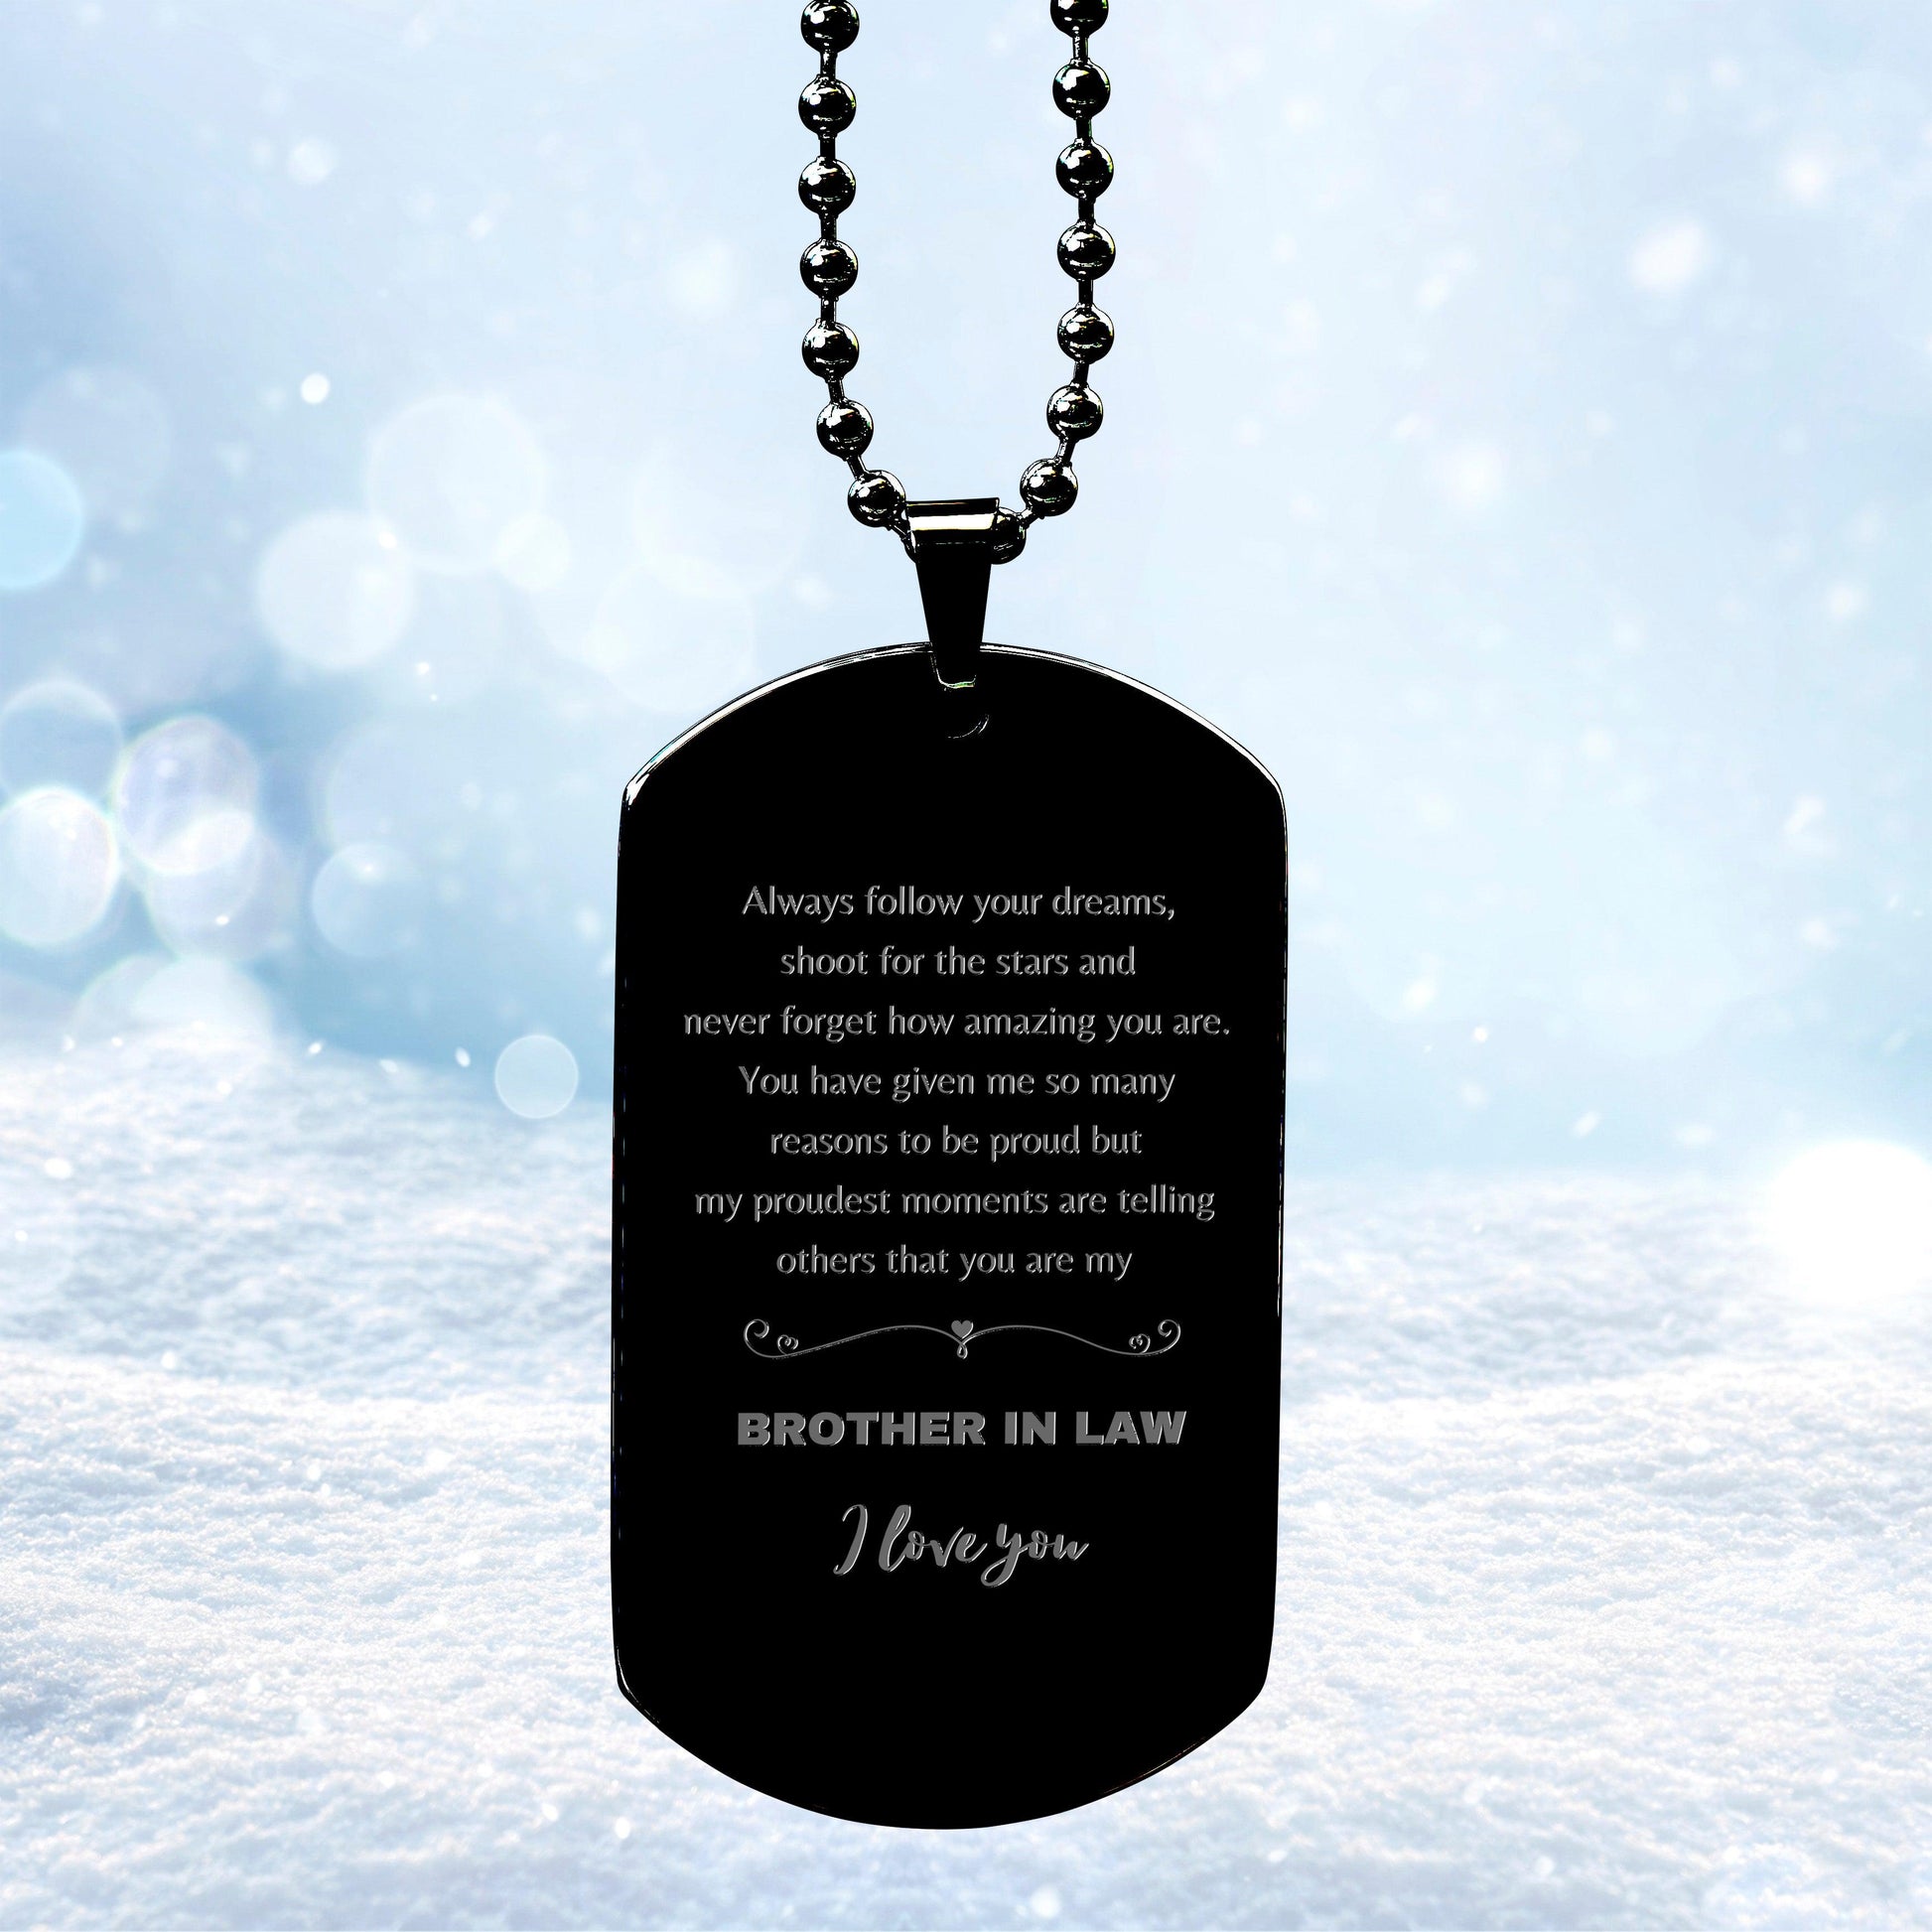 Black Dog Tag for Brother In Law Present, Brother In Law Always follow your dreams, never forget how amazing you are, Brother In Law Birthday Christmas Gifts Jewelry for Girls Boys Teen Men Women - Mallard Moon Gift Shop